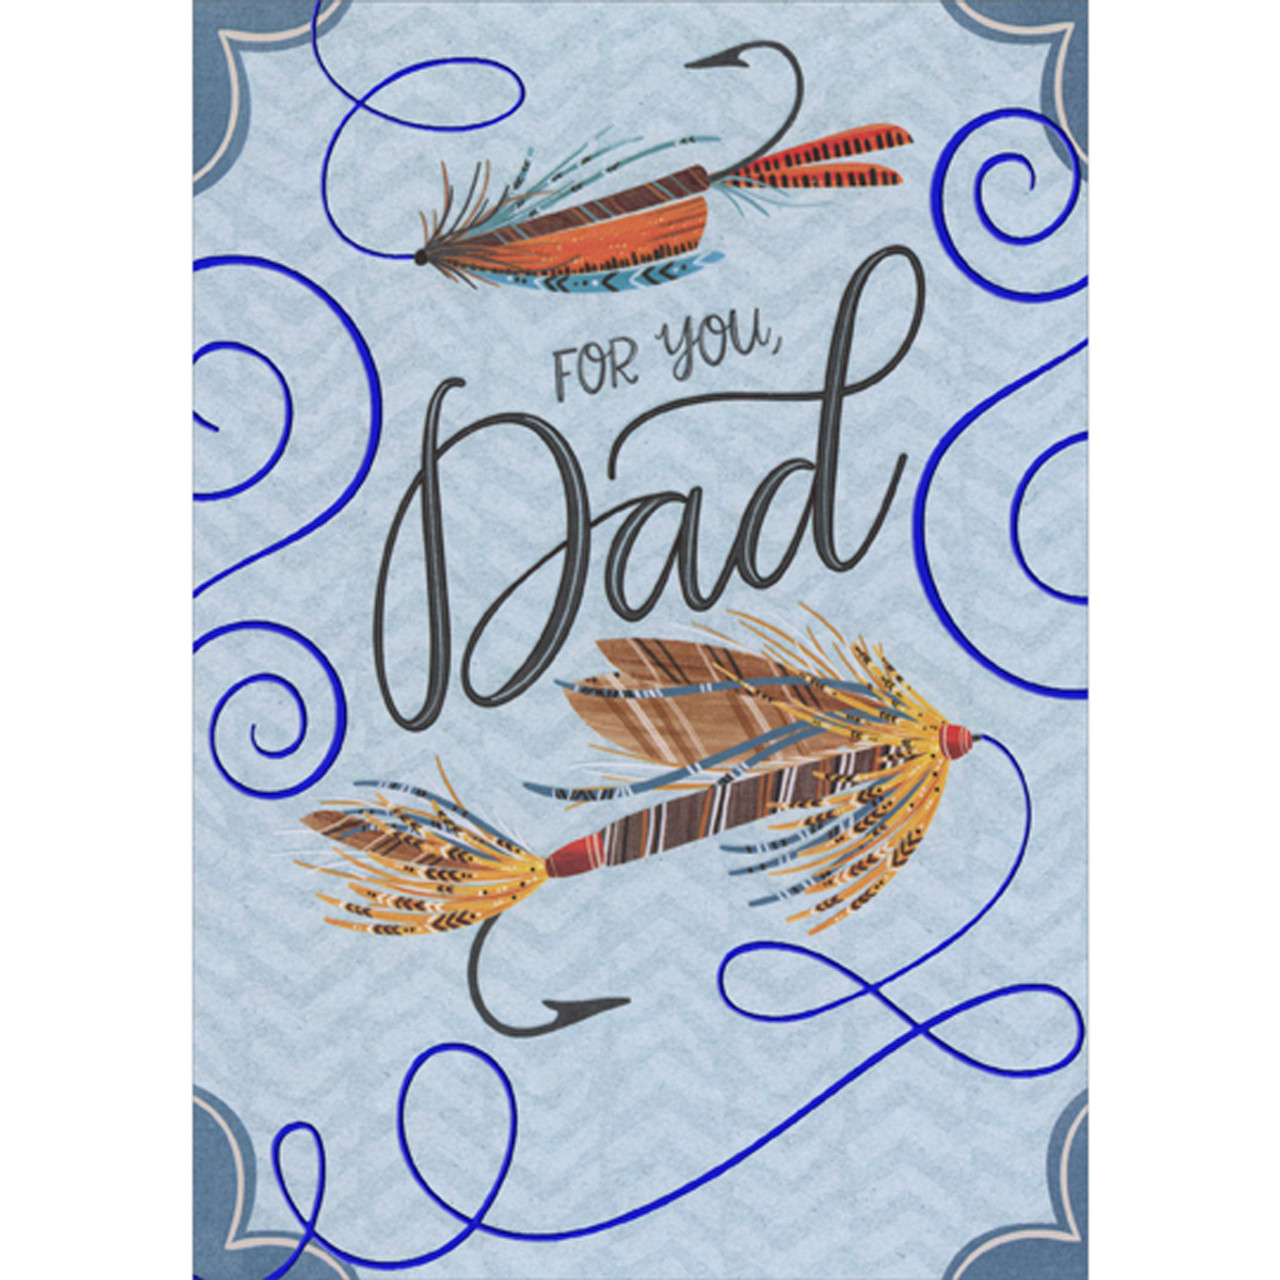 Two Fishing Lures on Swirling Blue Foil Lines Father's Day Card for Dad  from Both of Us